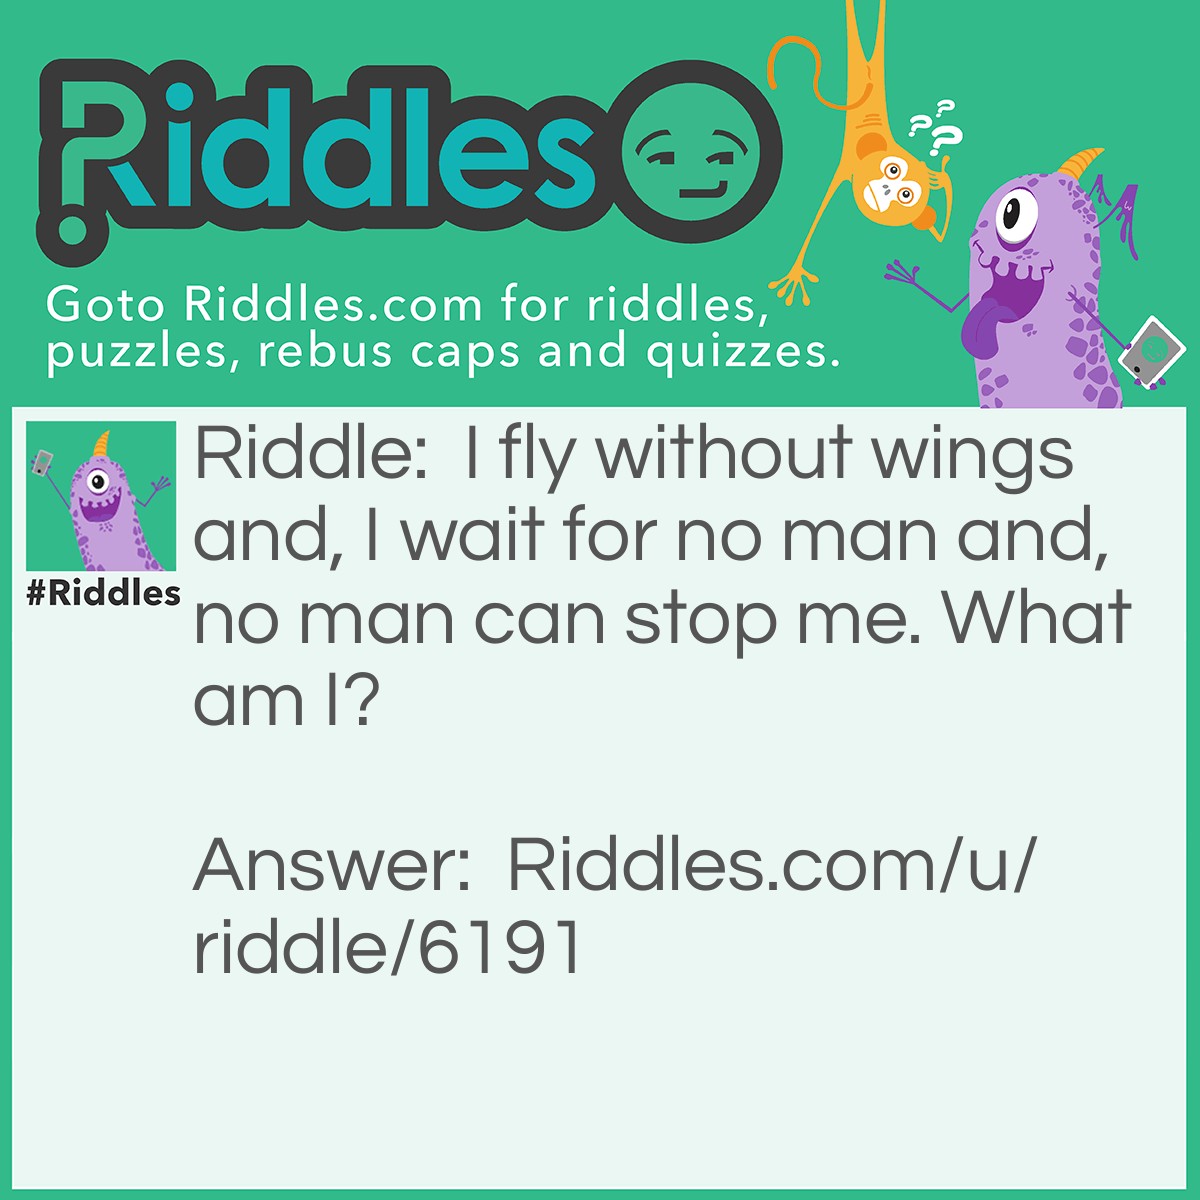 Riddle: I fly without wings and, I wait for no man and, no man can stop me. What am I? Answer: Time.